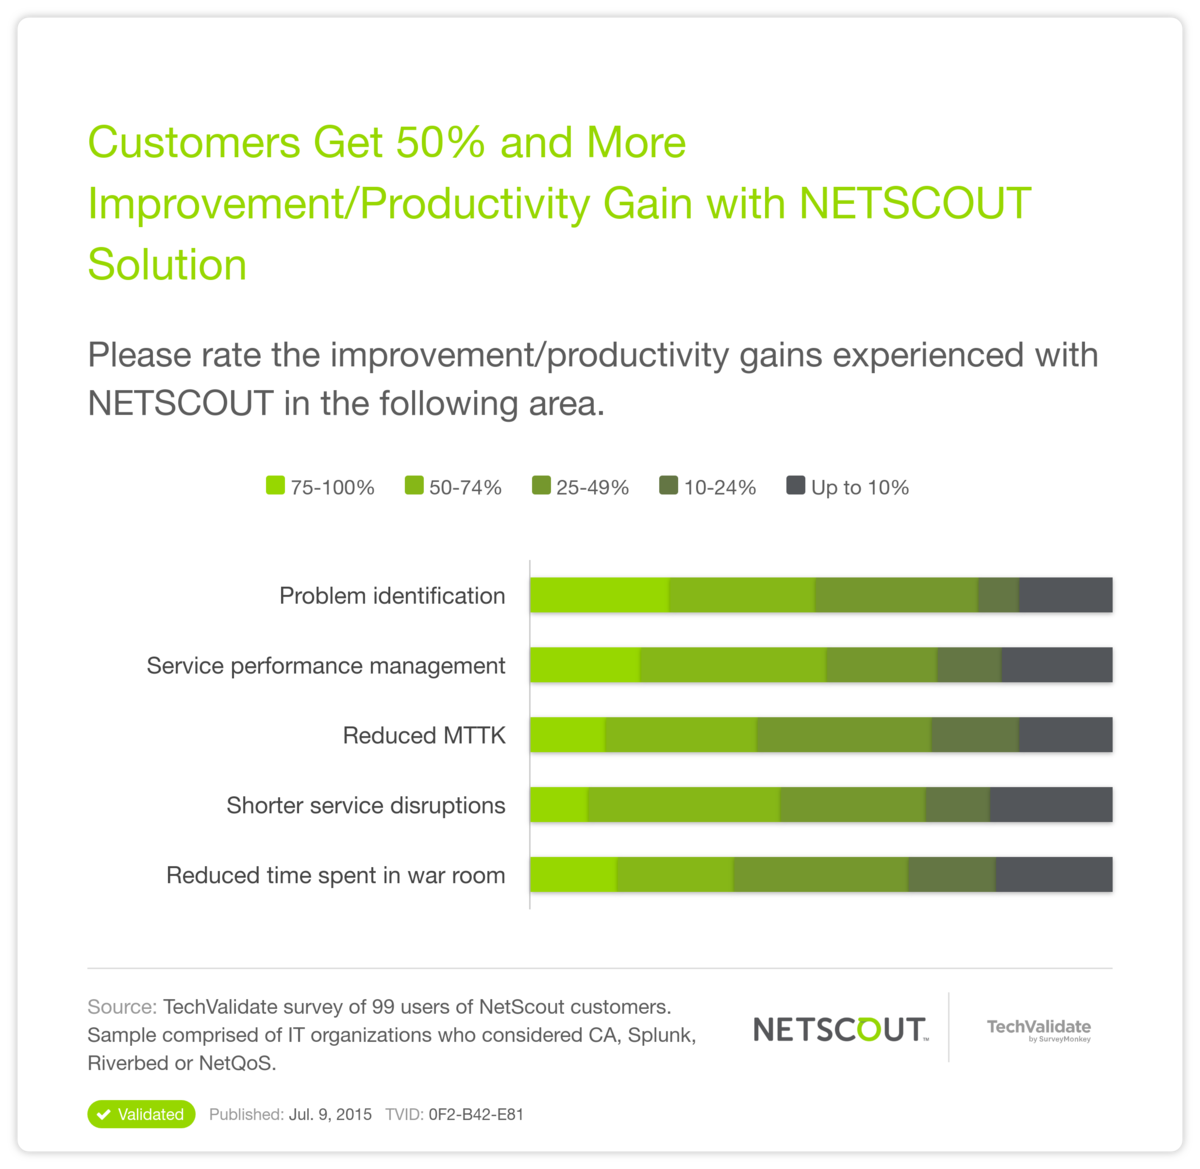 Customers Get 50% and More Improvement/Productivity Gain with NETSCOUT Solution